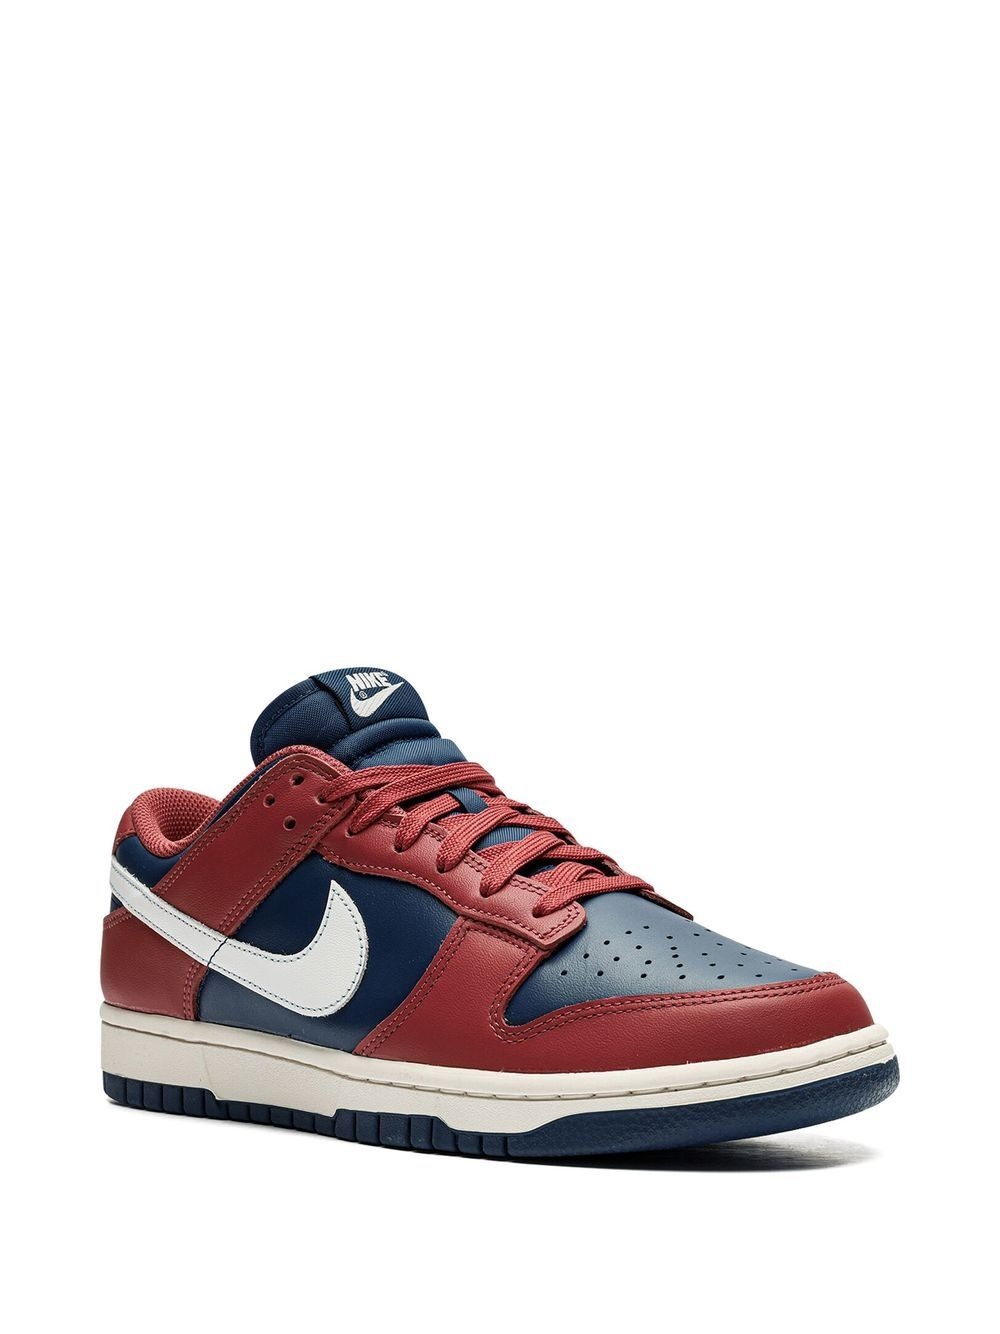 Dunk Low Retro "Canyon Rust" sneakers - 2